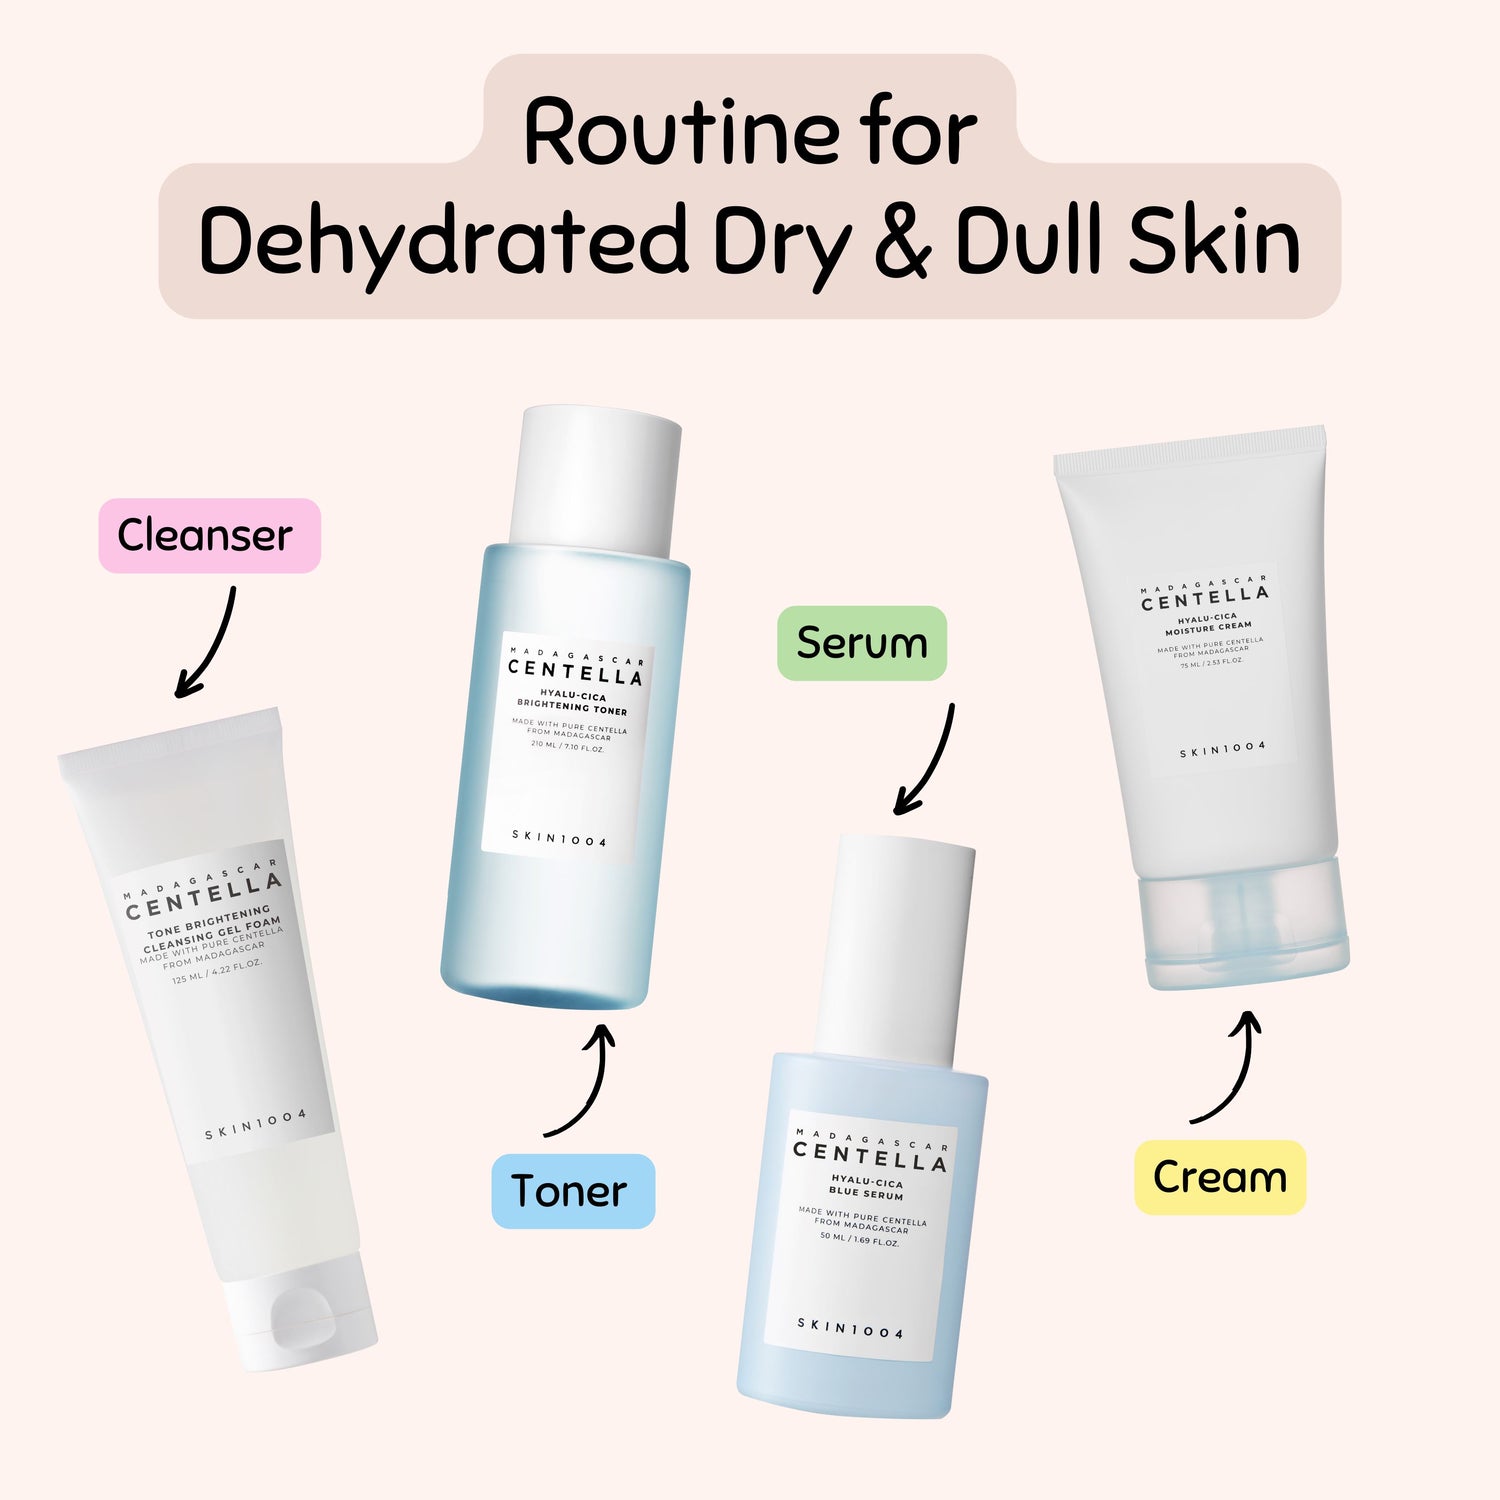 [Bank Transfer Offer]🌈 SKIN1004 Routine for Dehydrated Dry and Dull Skin Skin Care SKIN1004 ORION XO Sri Lanka